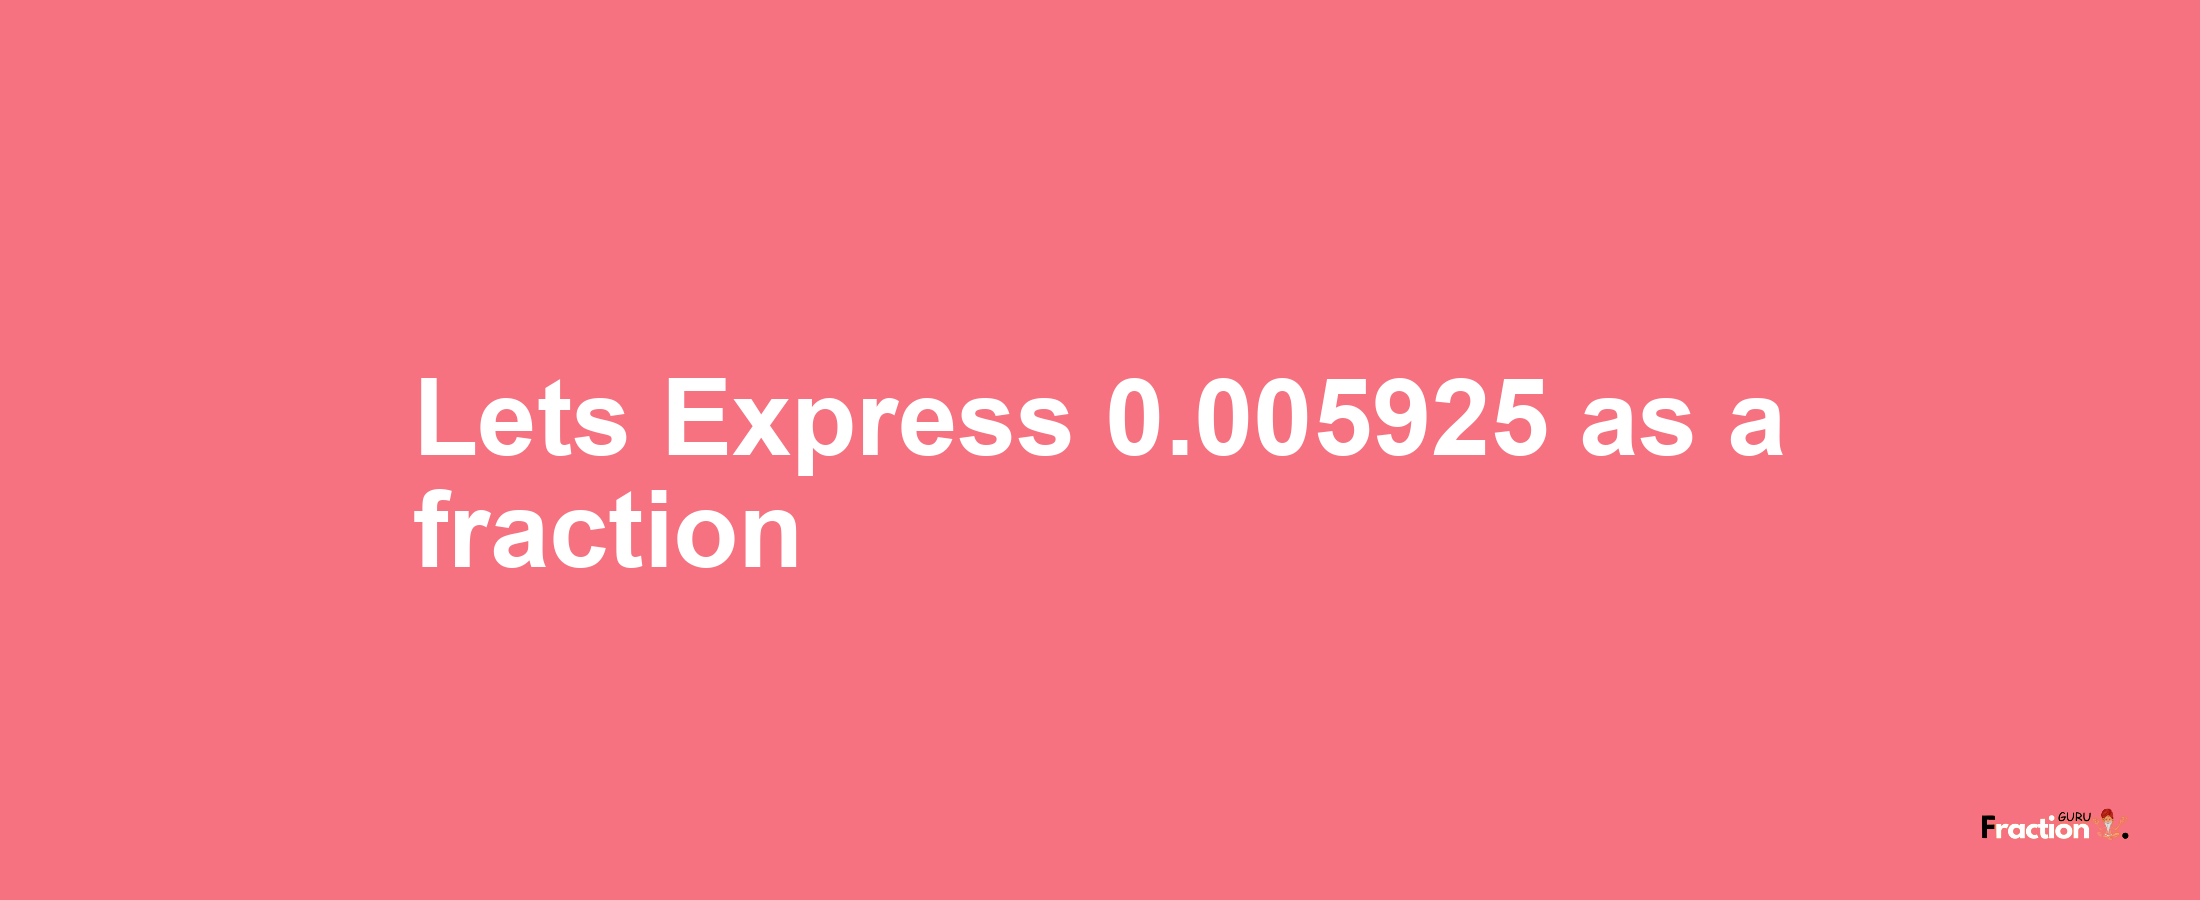 Lets Express 0.005925 as afraction